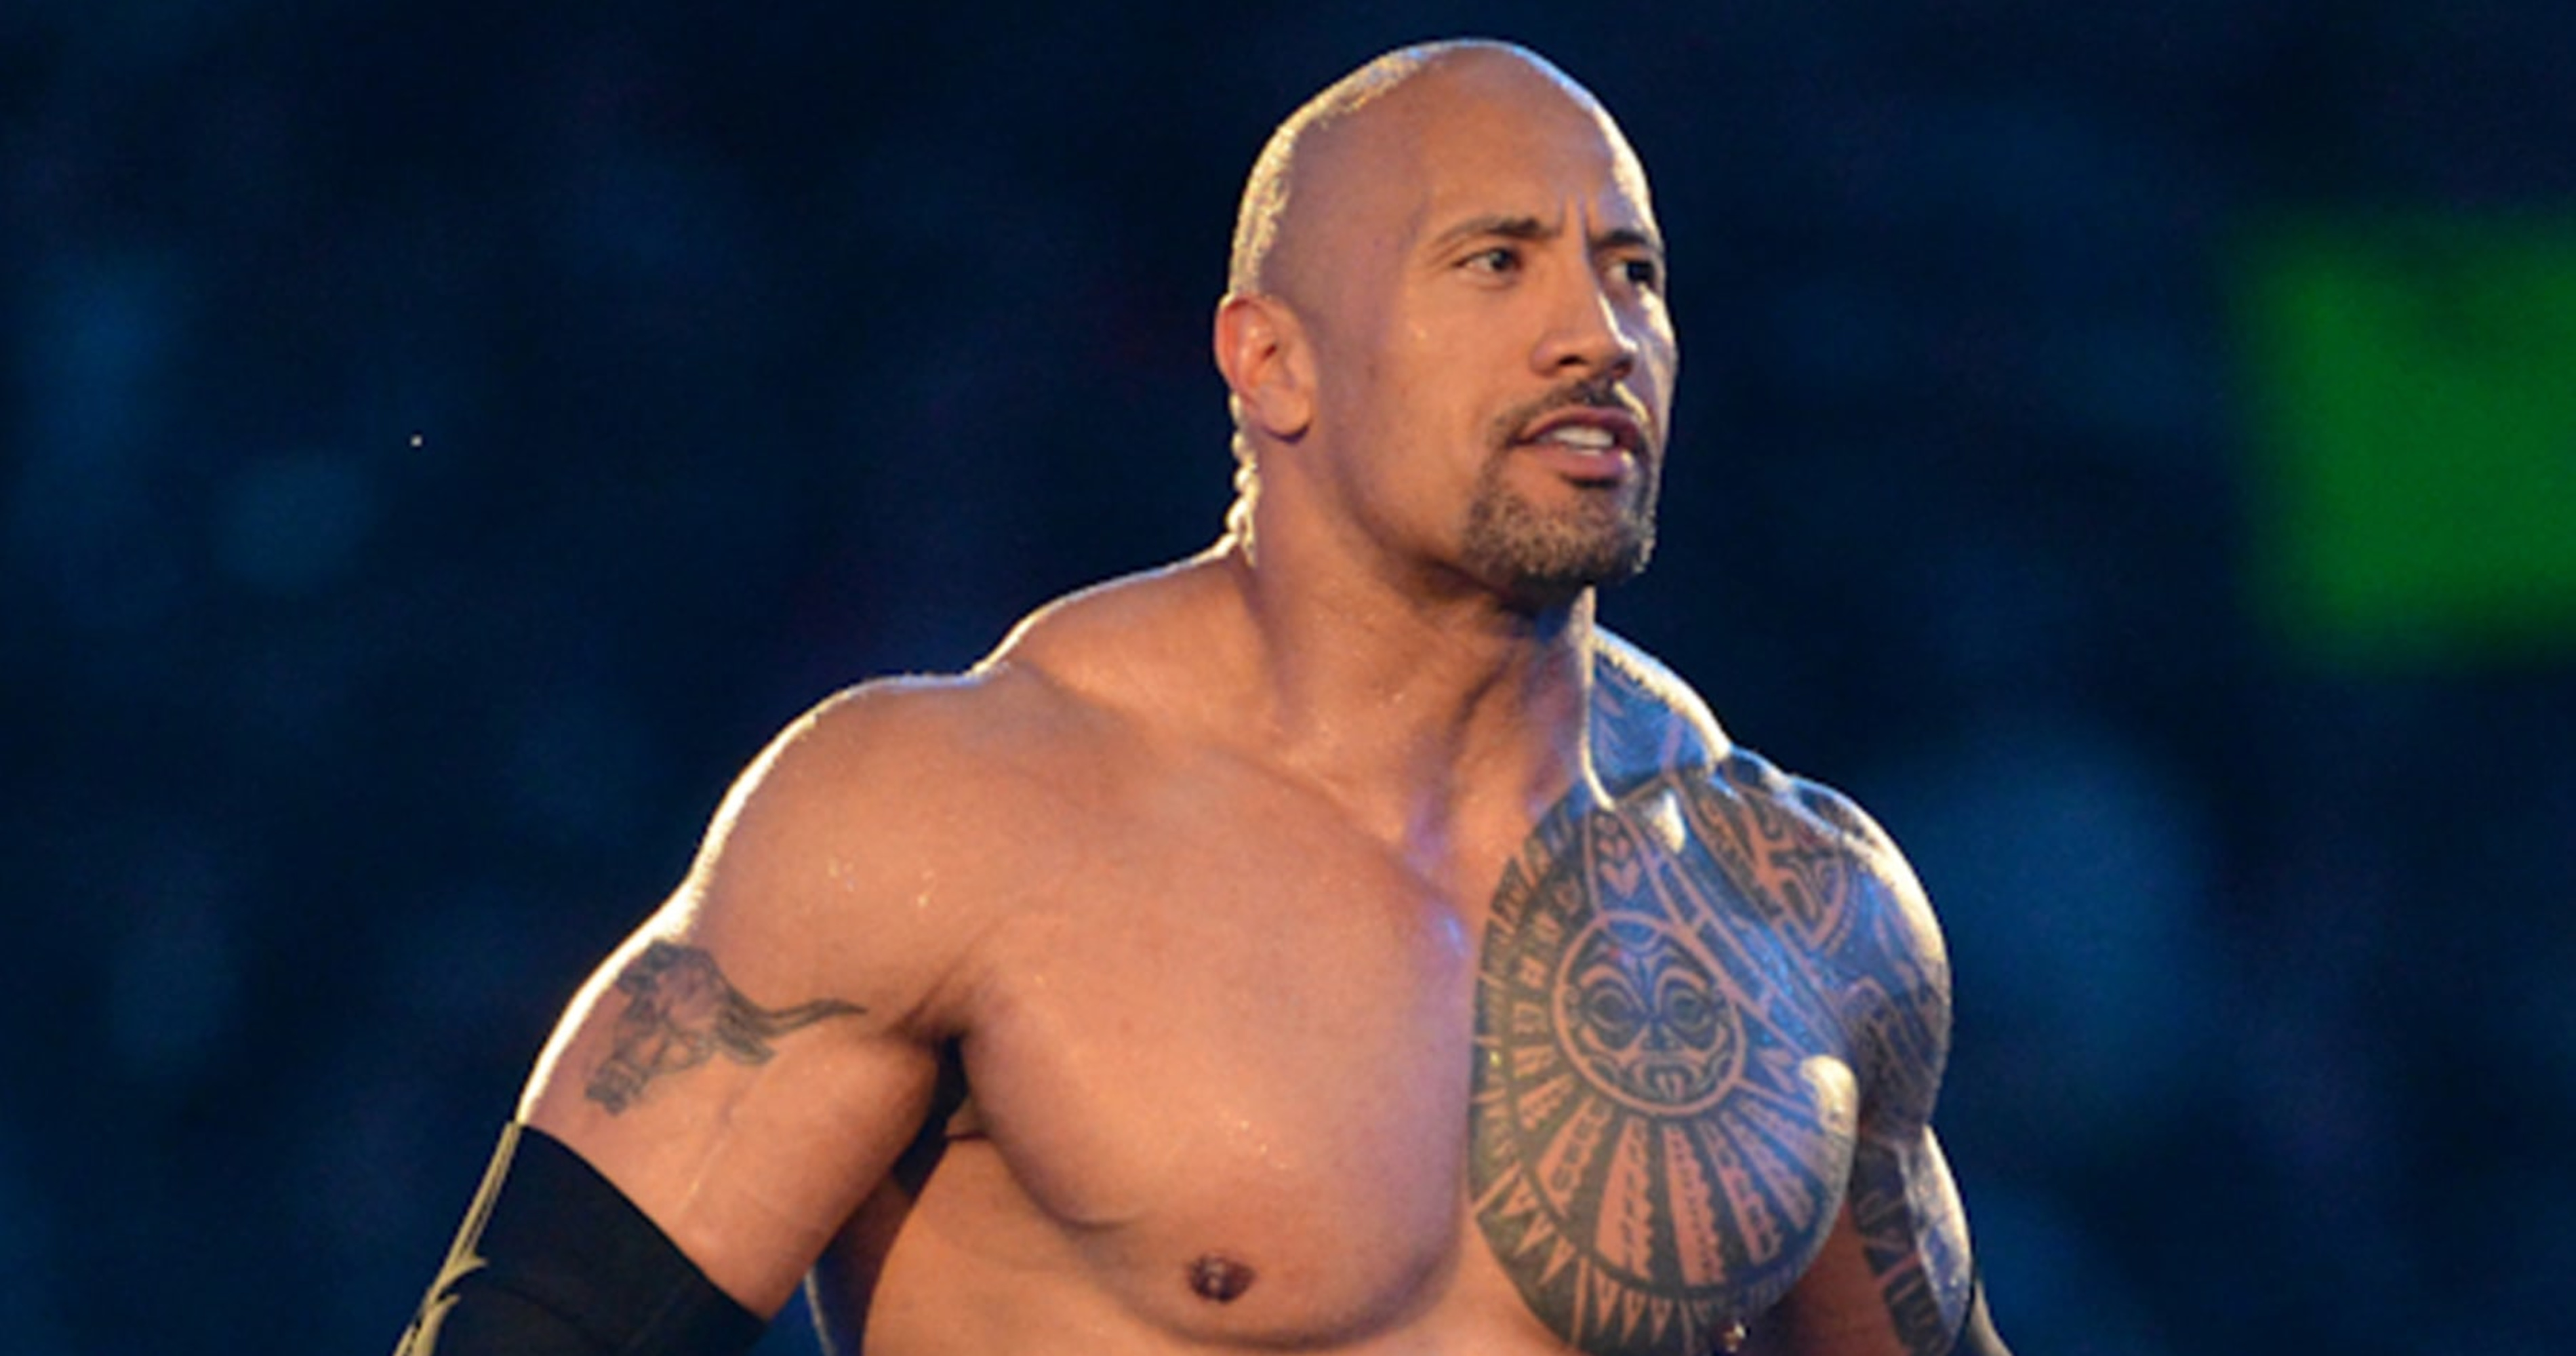 The Rock Denies 'Complete Horses--t' WWE Rumors About 'Double Standards' Backstage